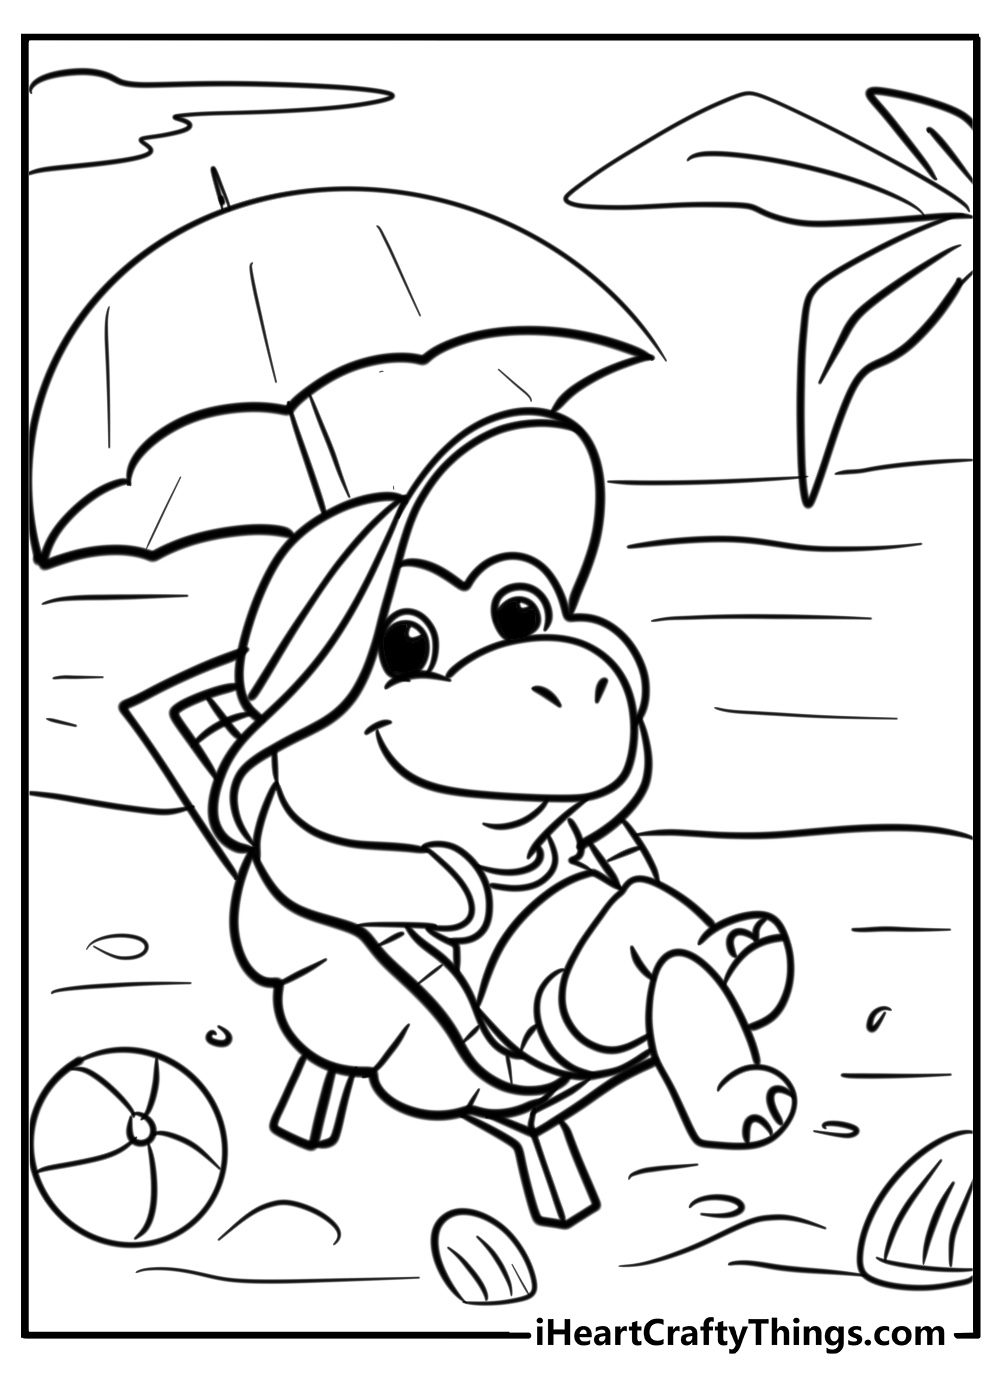 Cartoon turtle resting on beach to color